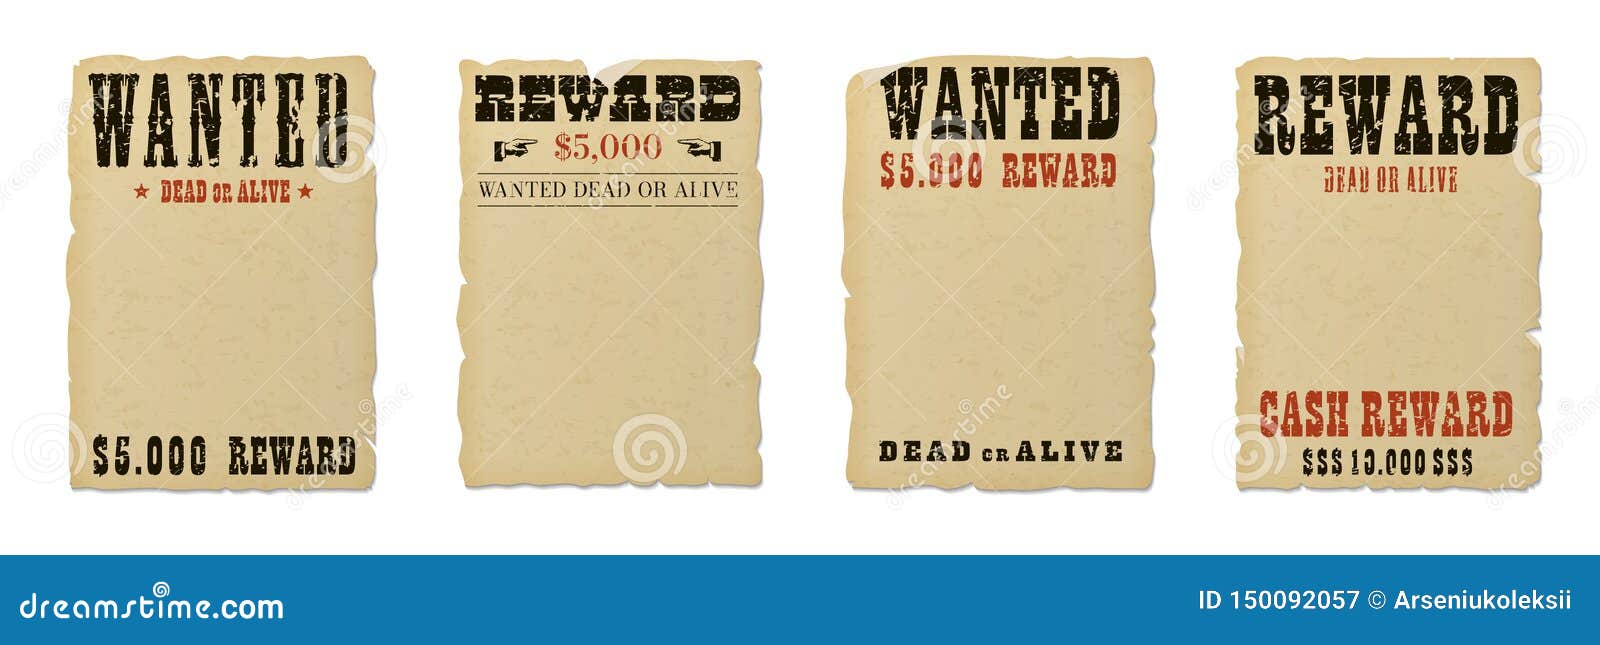 wanted dead or alive blank poster template